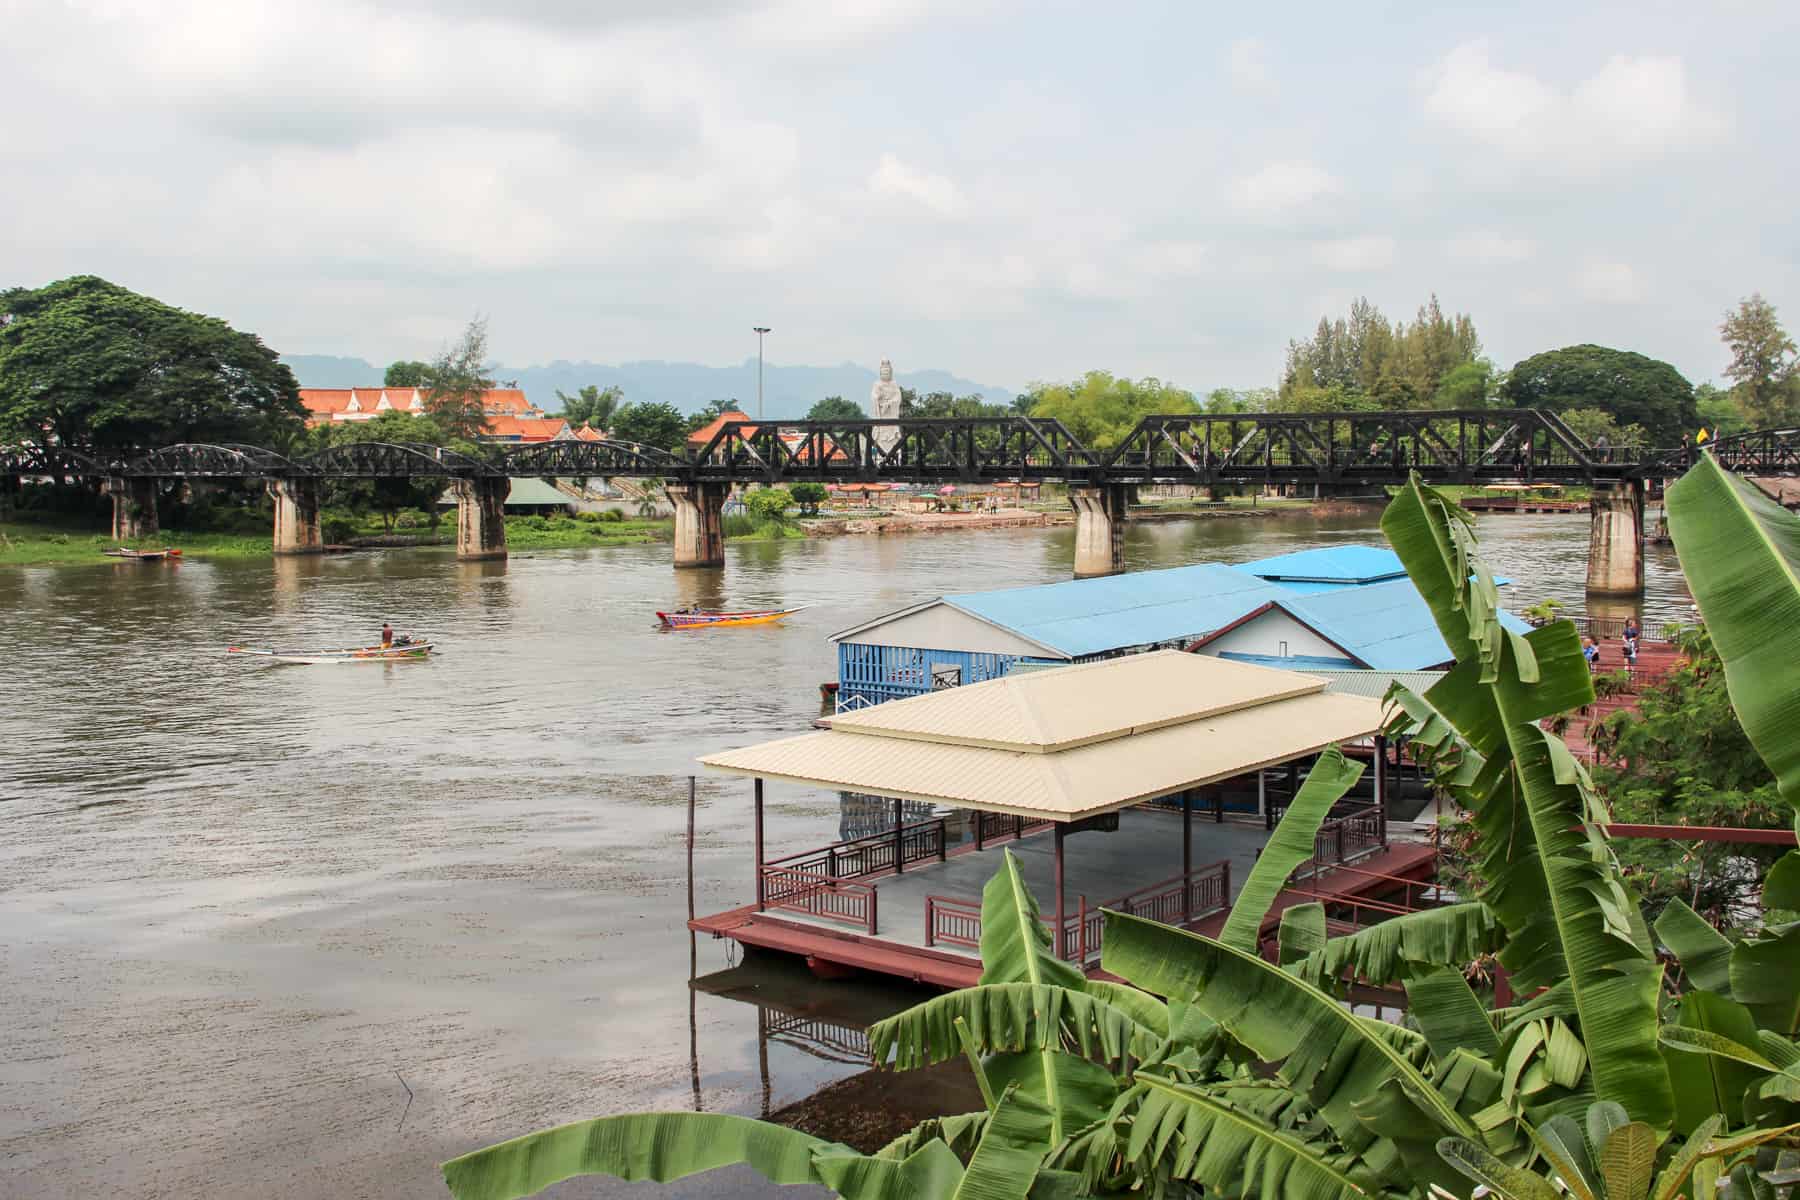 Beige and blue roof huts and two boats in front of the Bridge over the River Kwai in Thailand